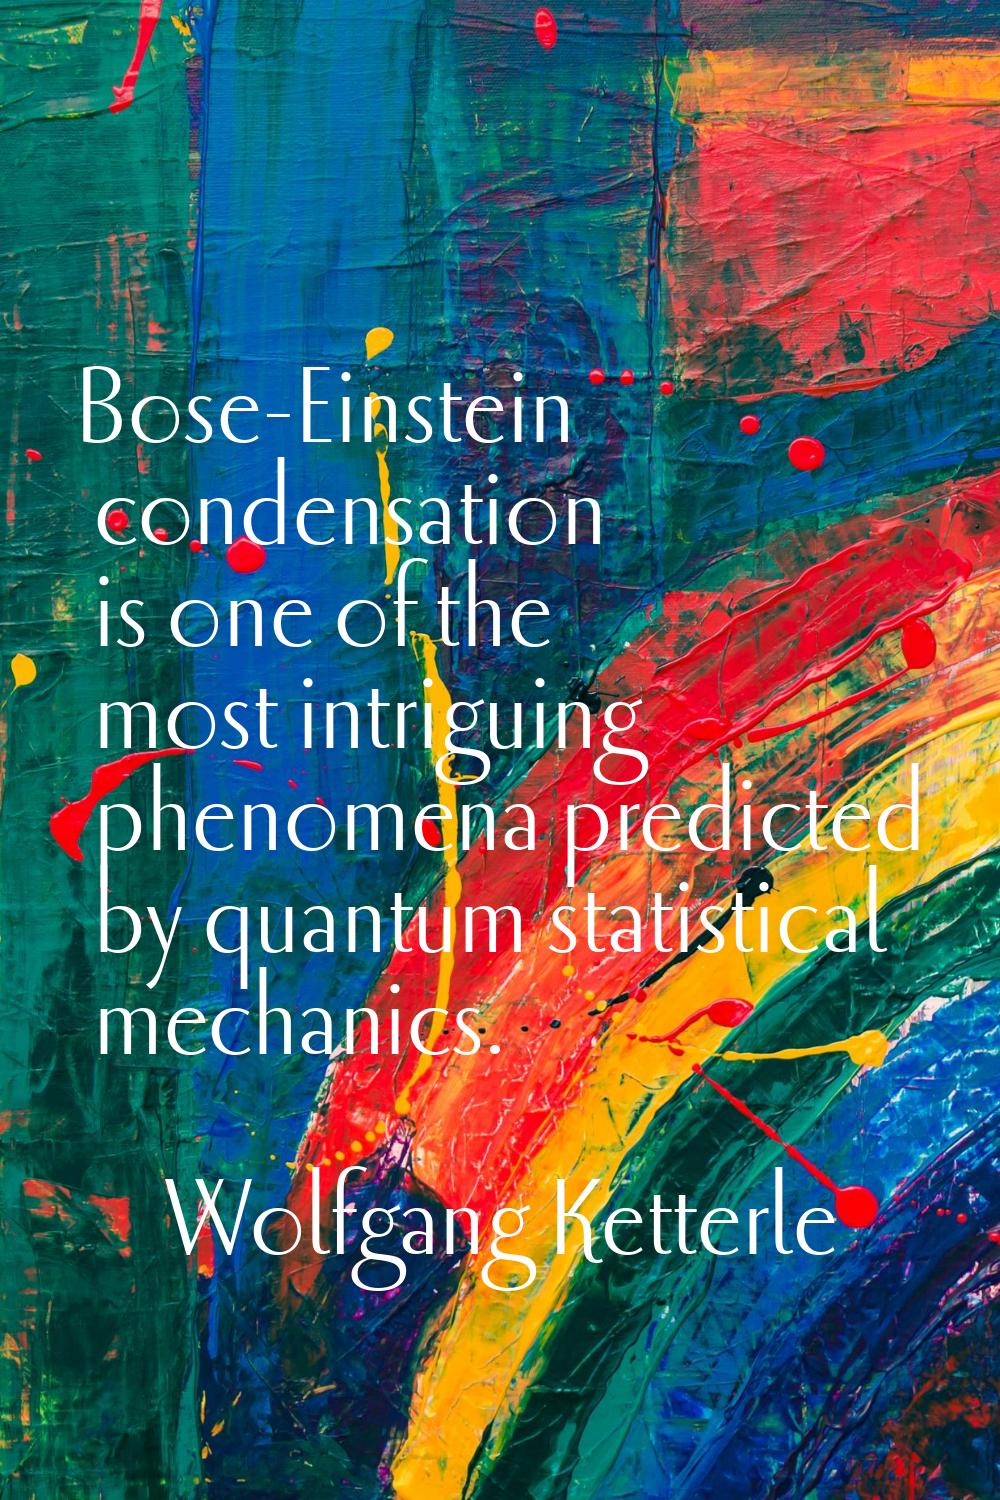 Bose-Einstein condensation is one of the most intriguing phenomena predicted by quantum statistical